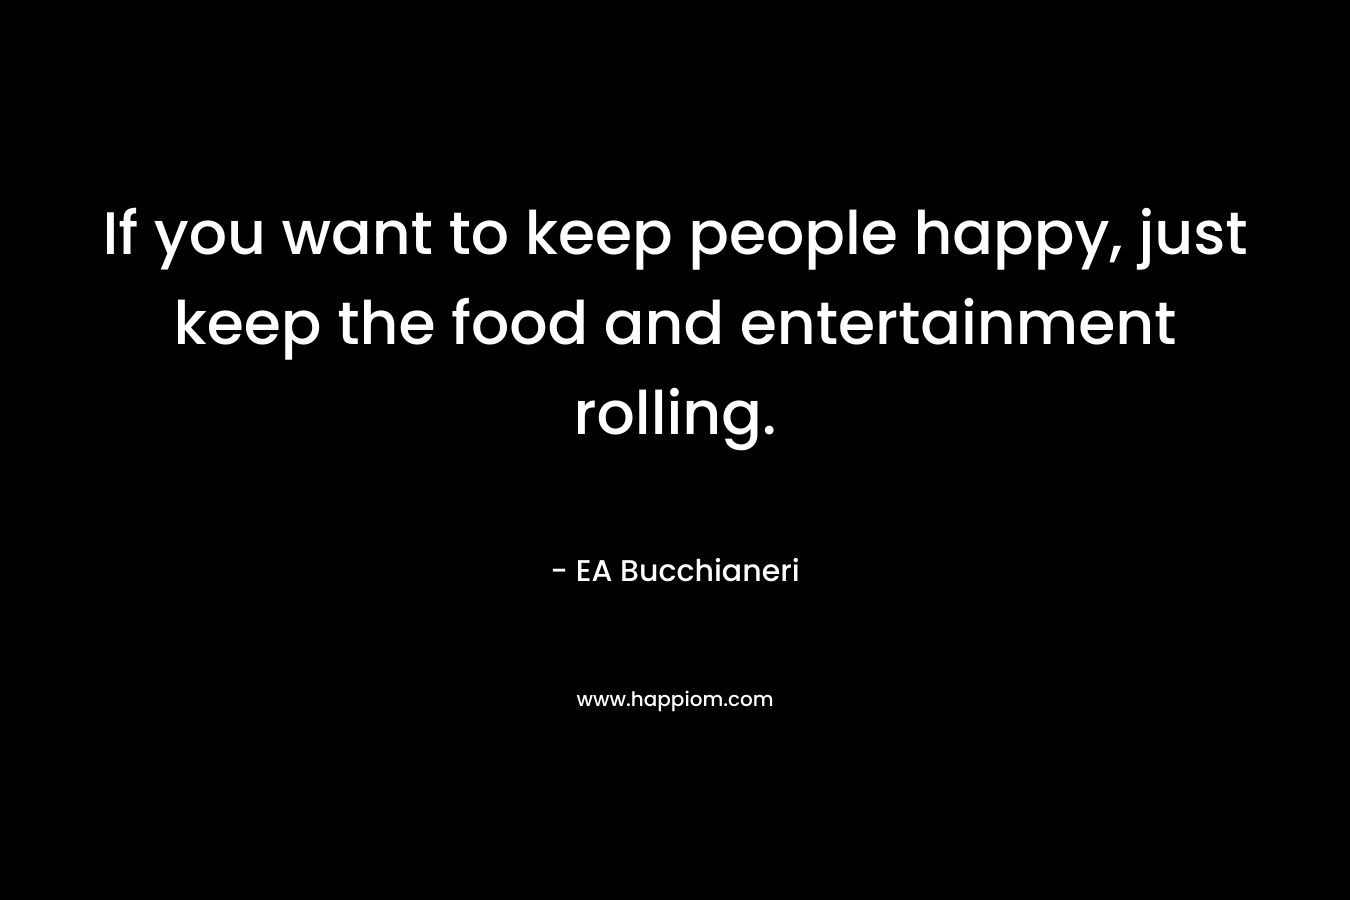 If you want to keep people happy, just keep the food and entertainment rolling.